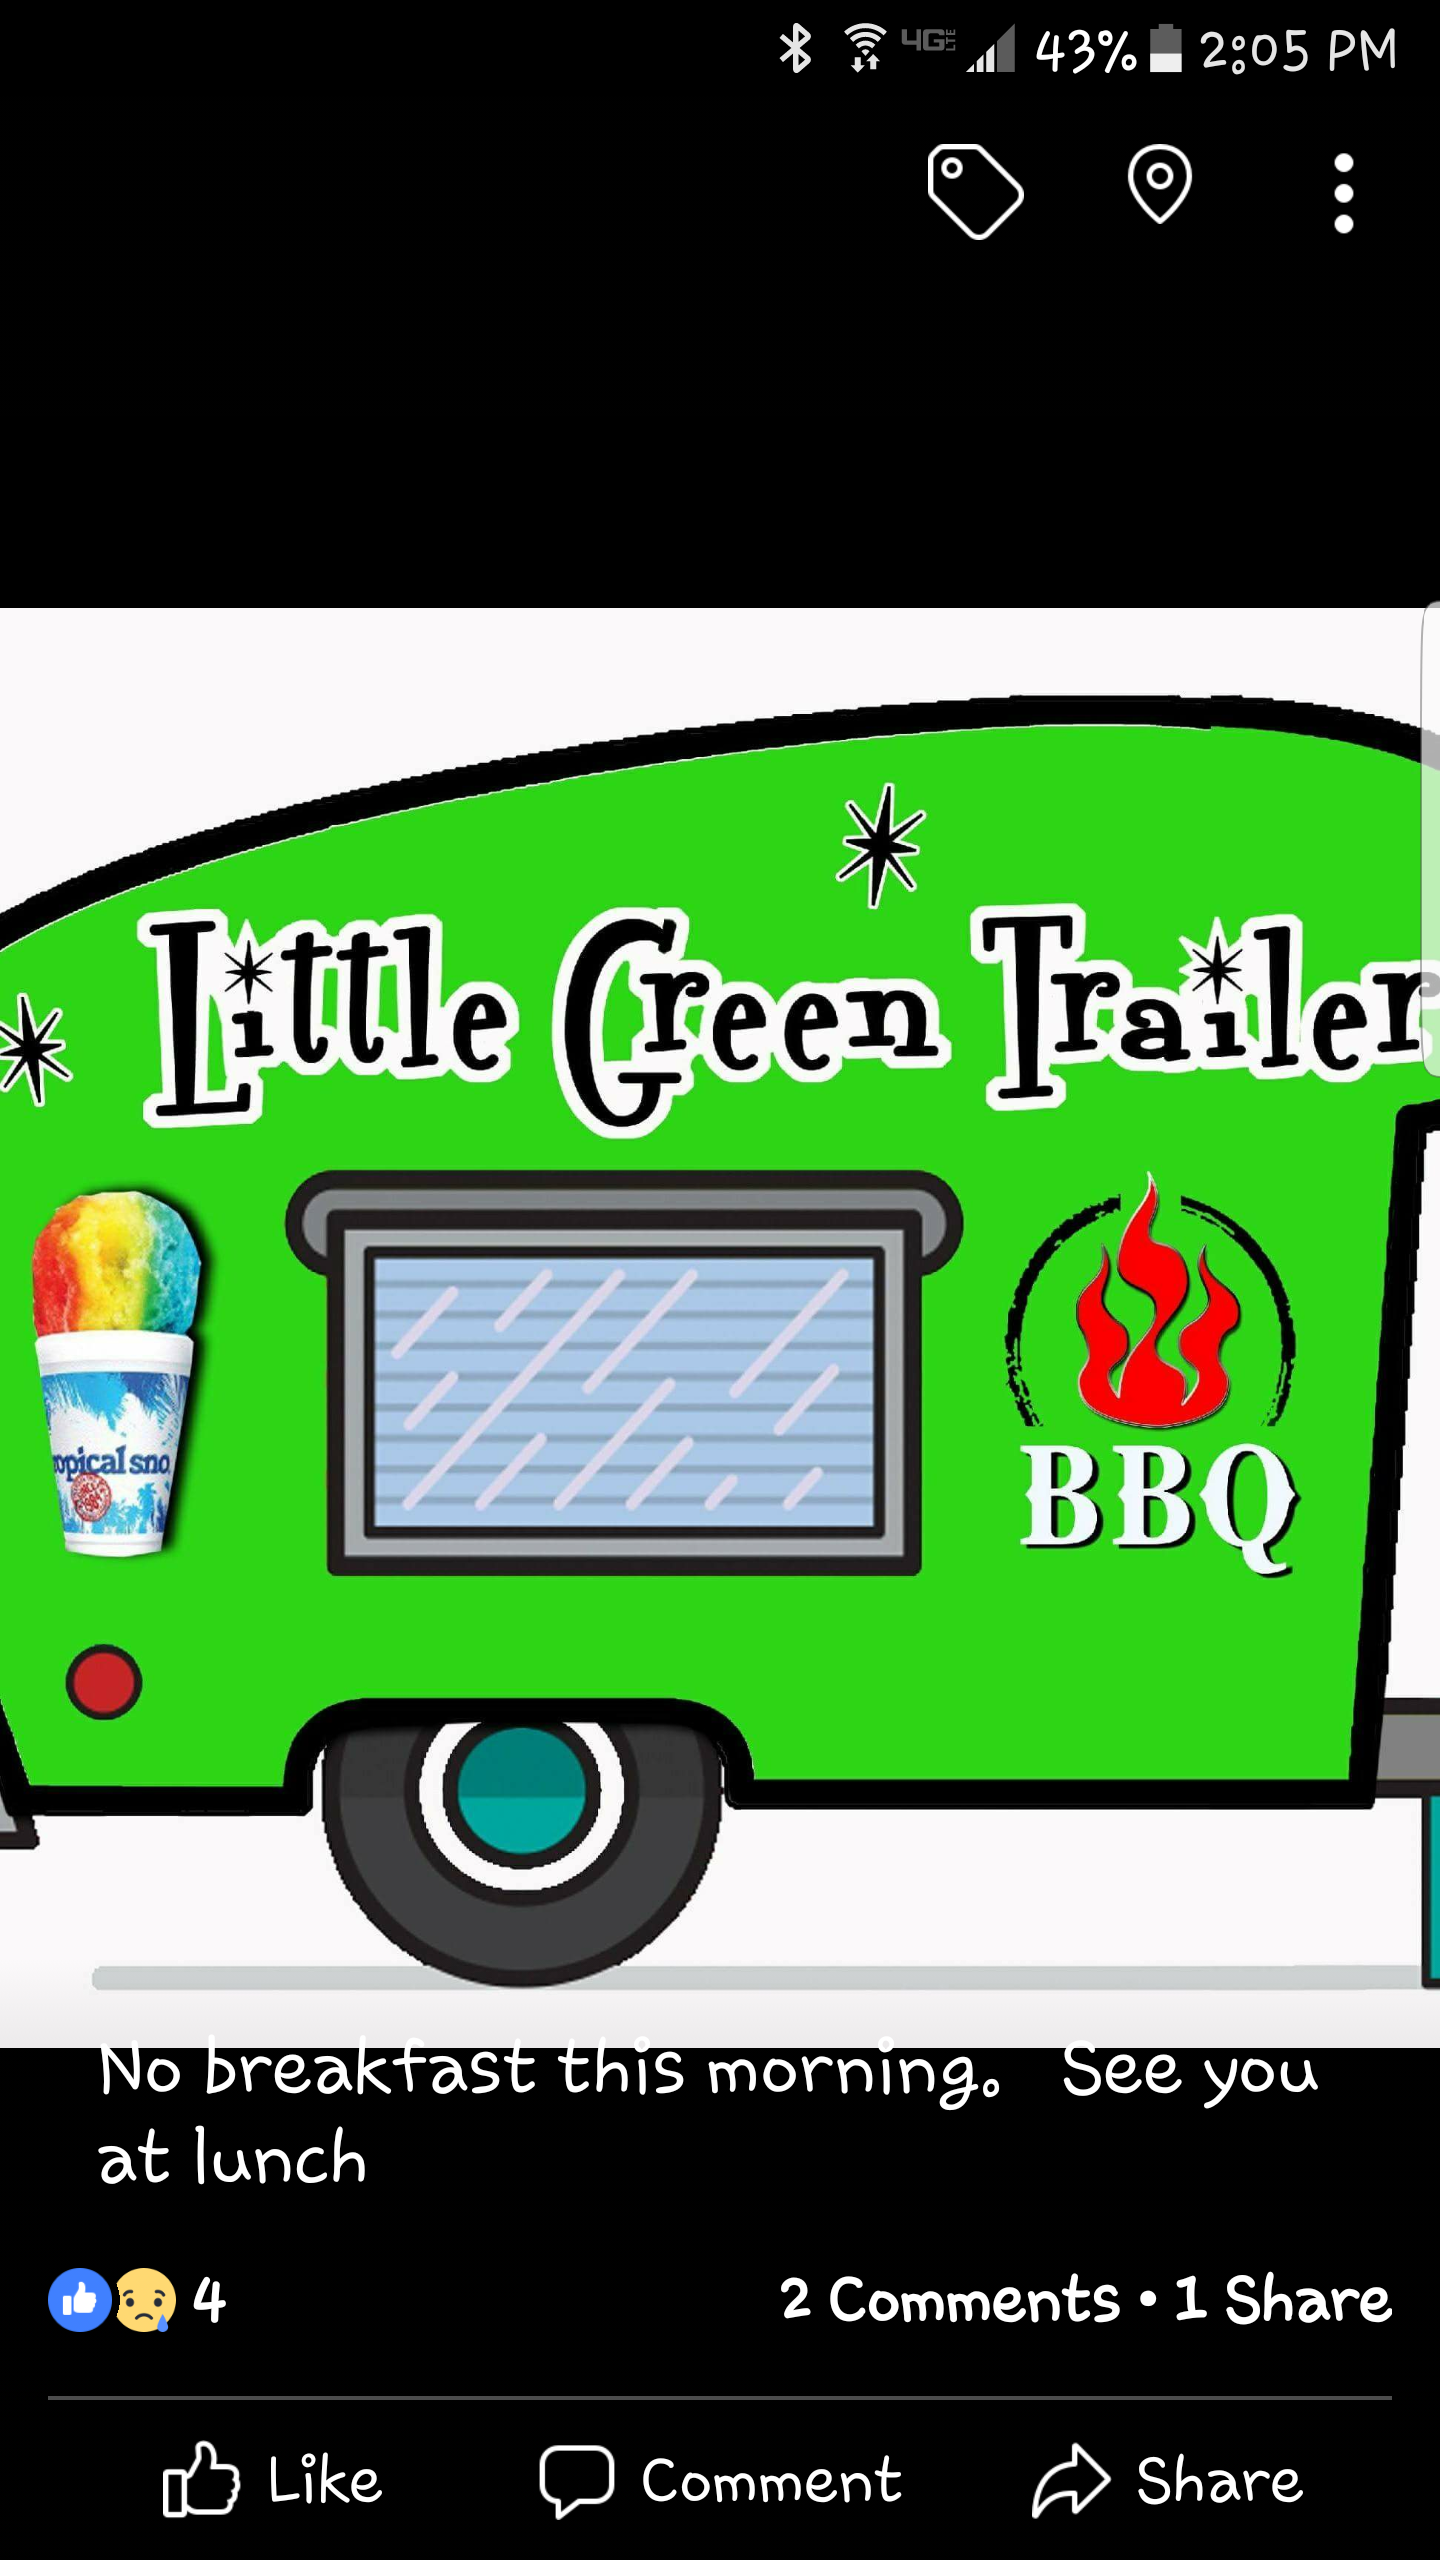 Little Green Trailer Catering Services